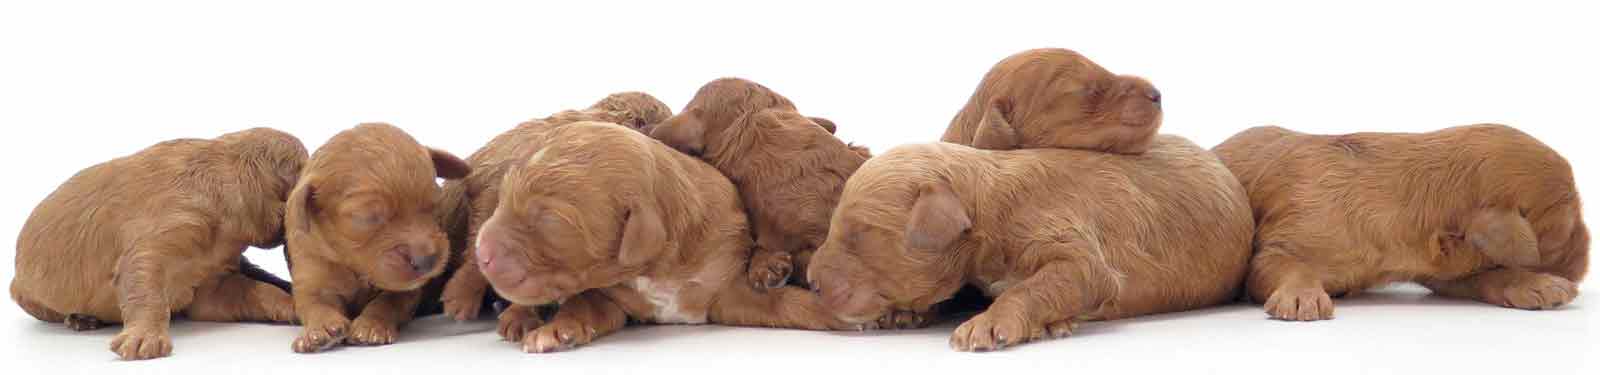 litter of puppies red white and brown